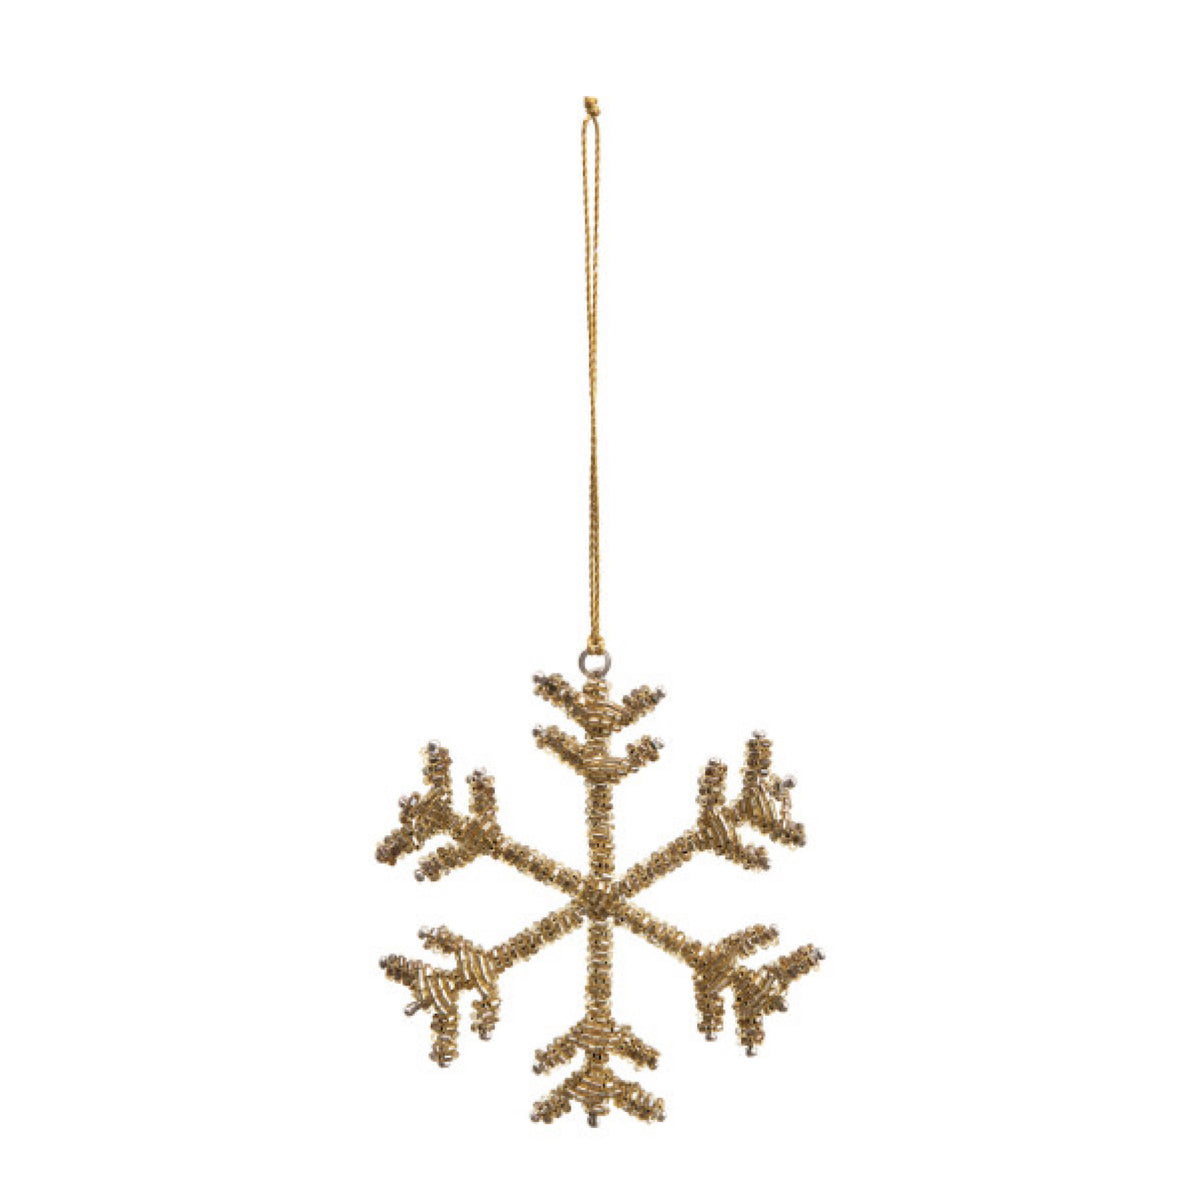 Glass Bead Snowflake Ornaments, Gold Finish, 2 Sizes